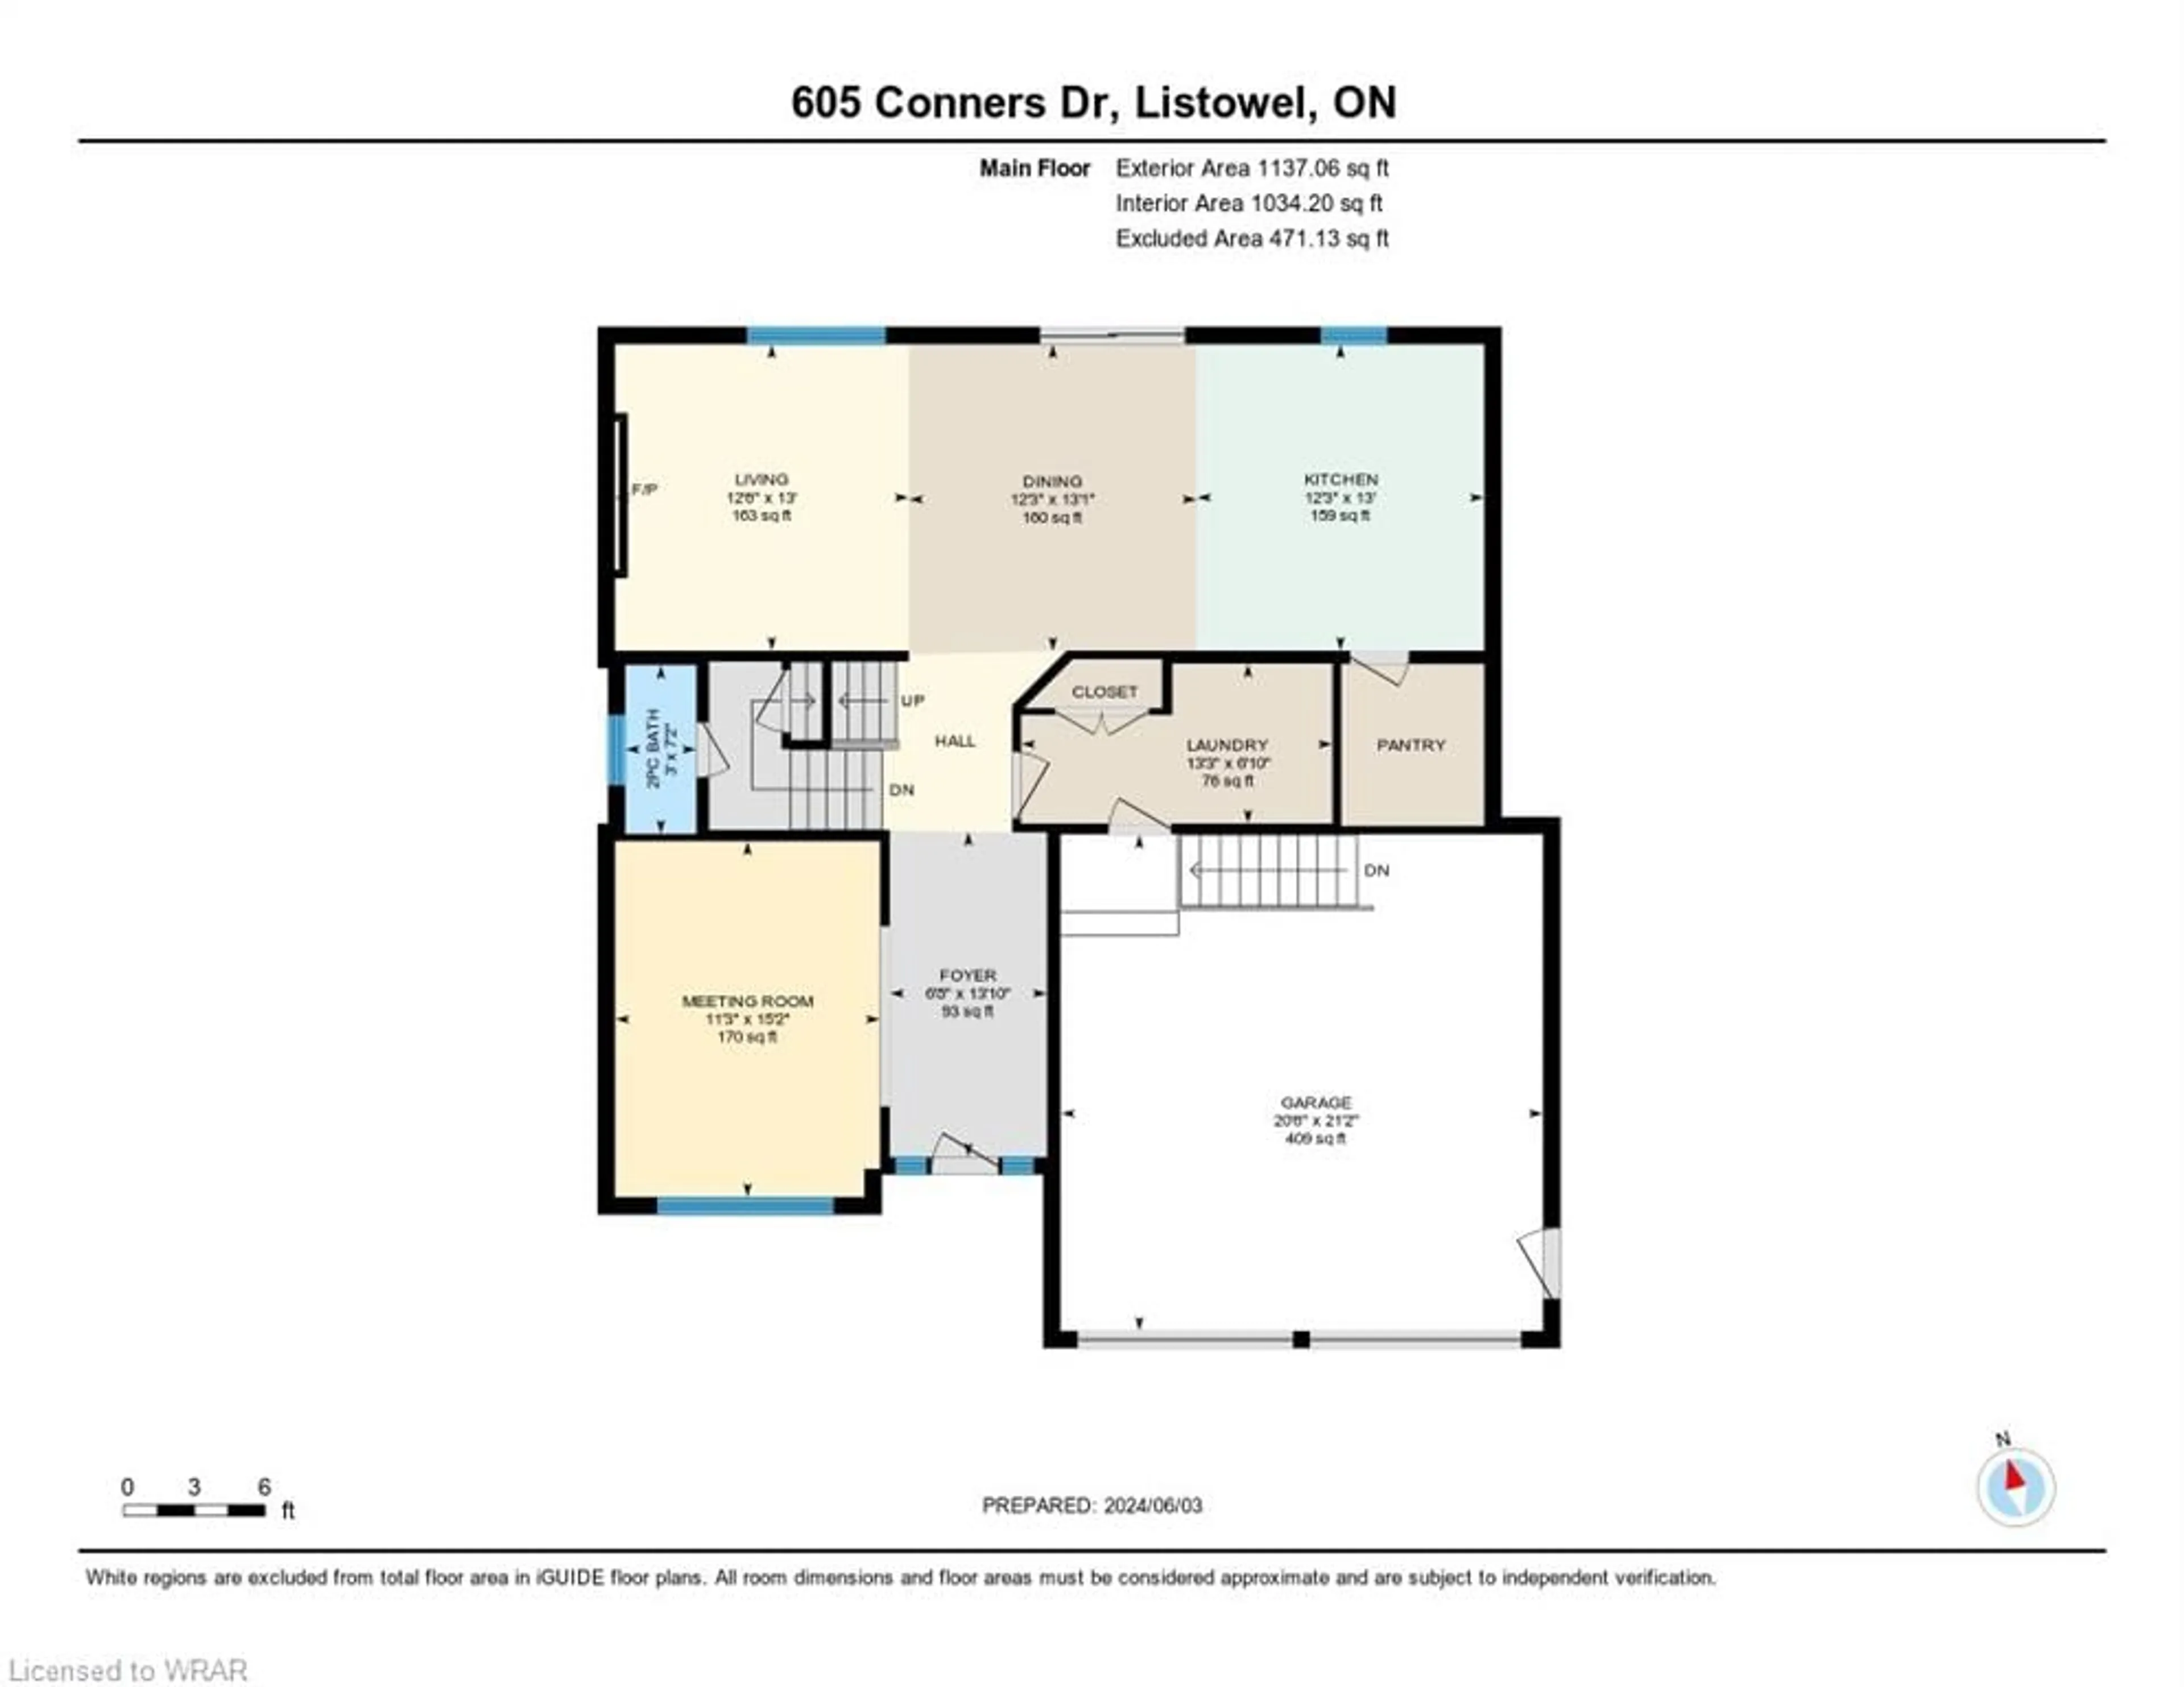 Floor plan for 605 Conners Dr Dr, Listowel Ontario N4W 0J3